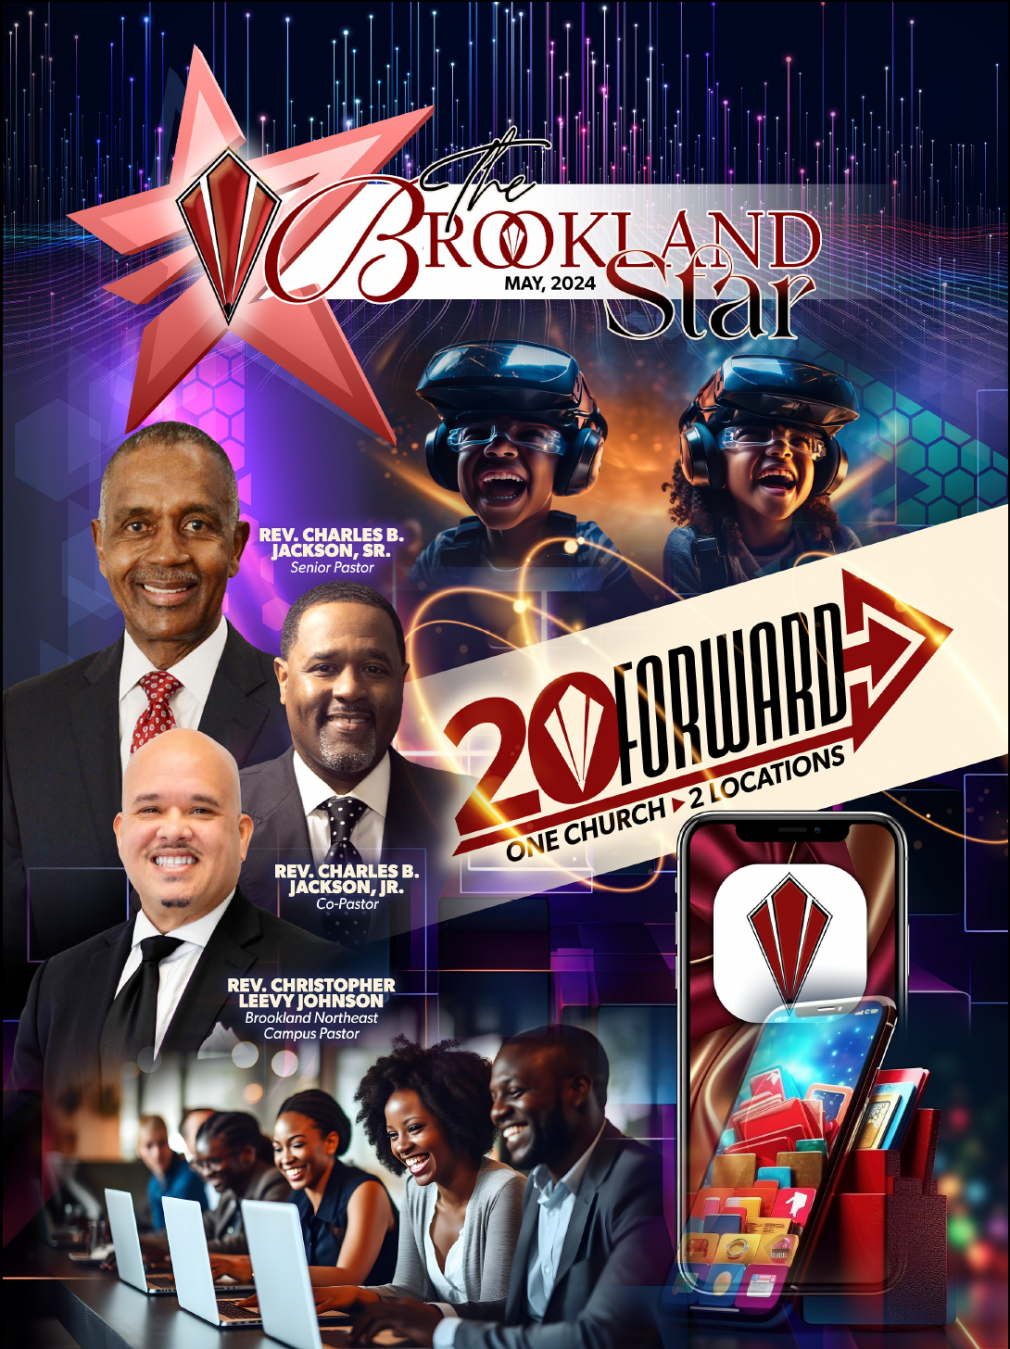 The Brookland Star May 2024 Edition